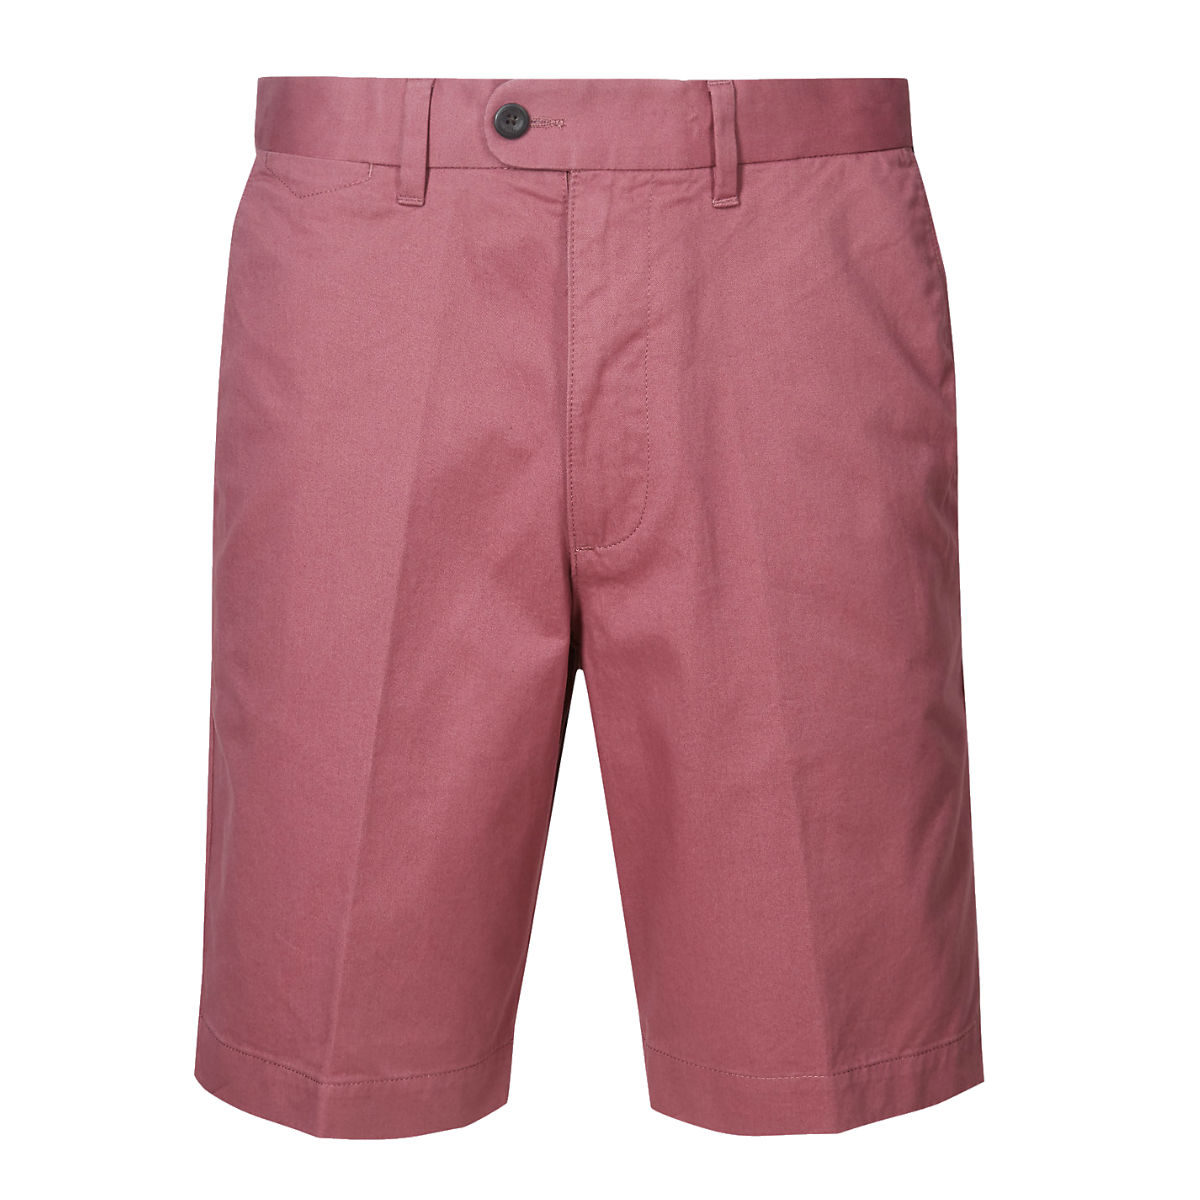 Raspberry pure cotton shorts, £25, Marks & Spencer